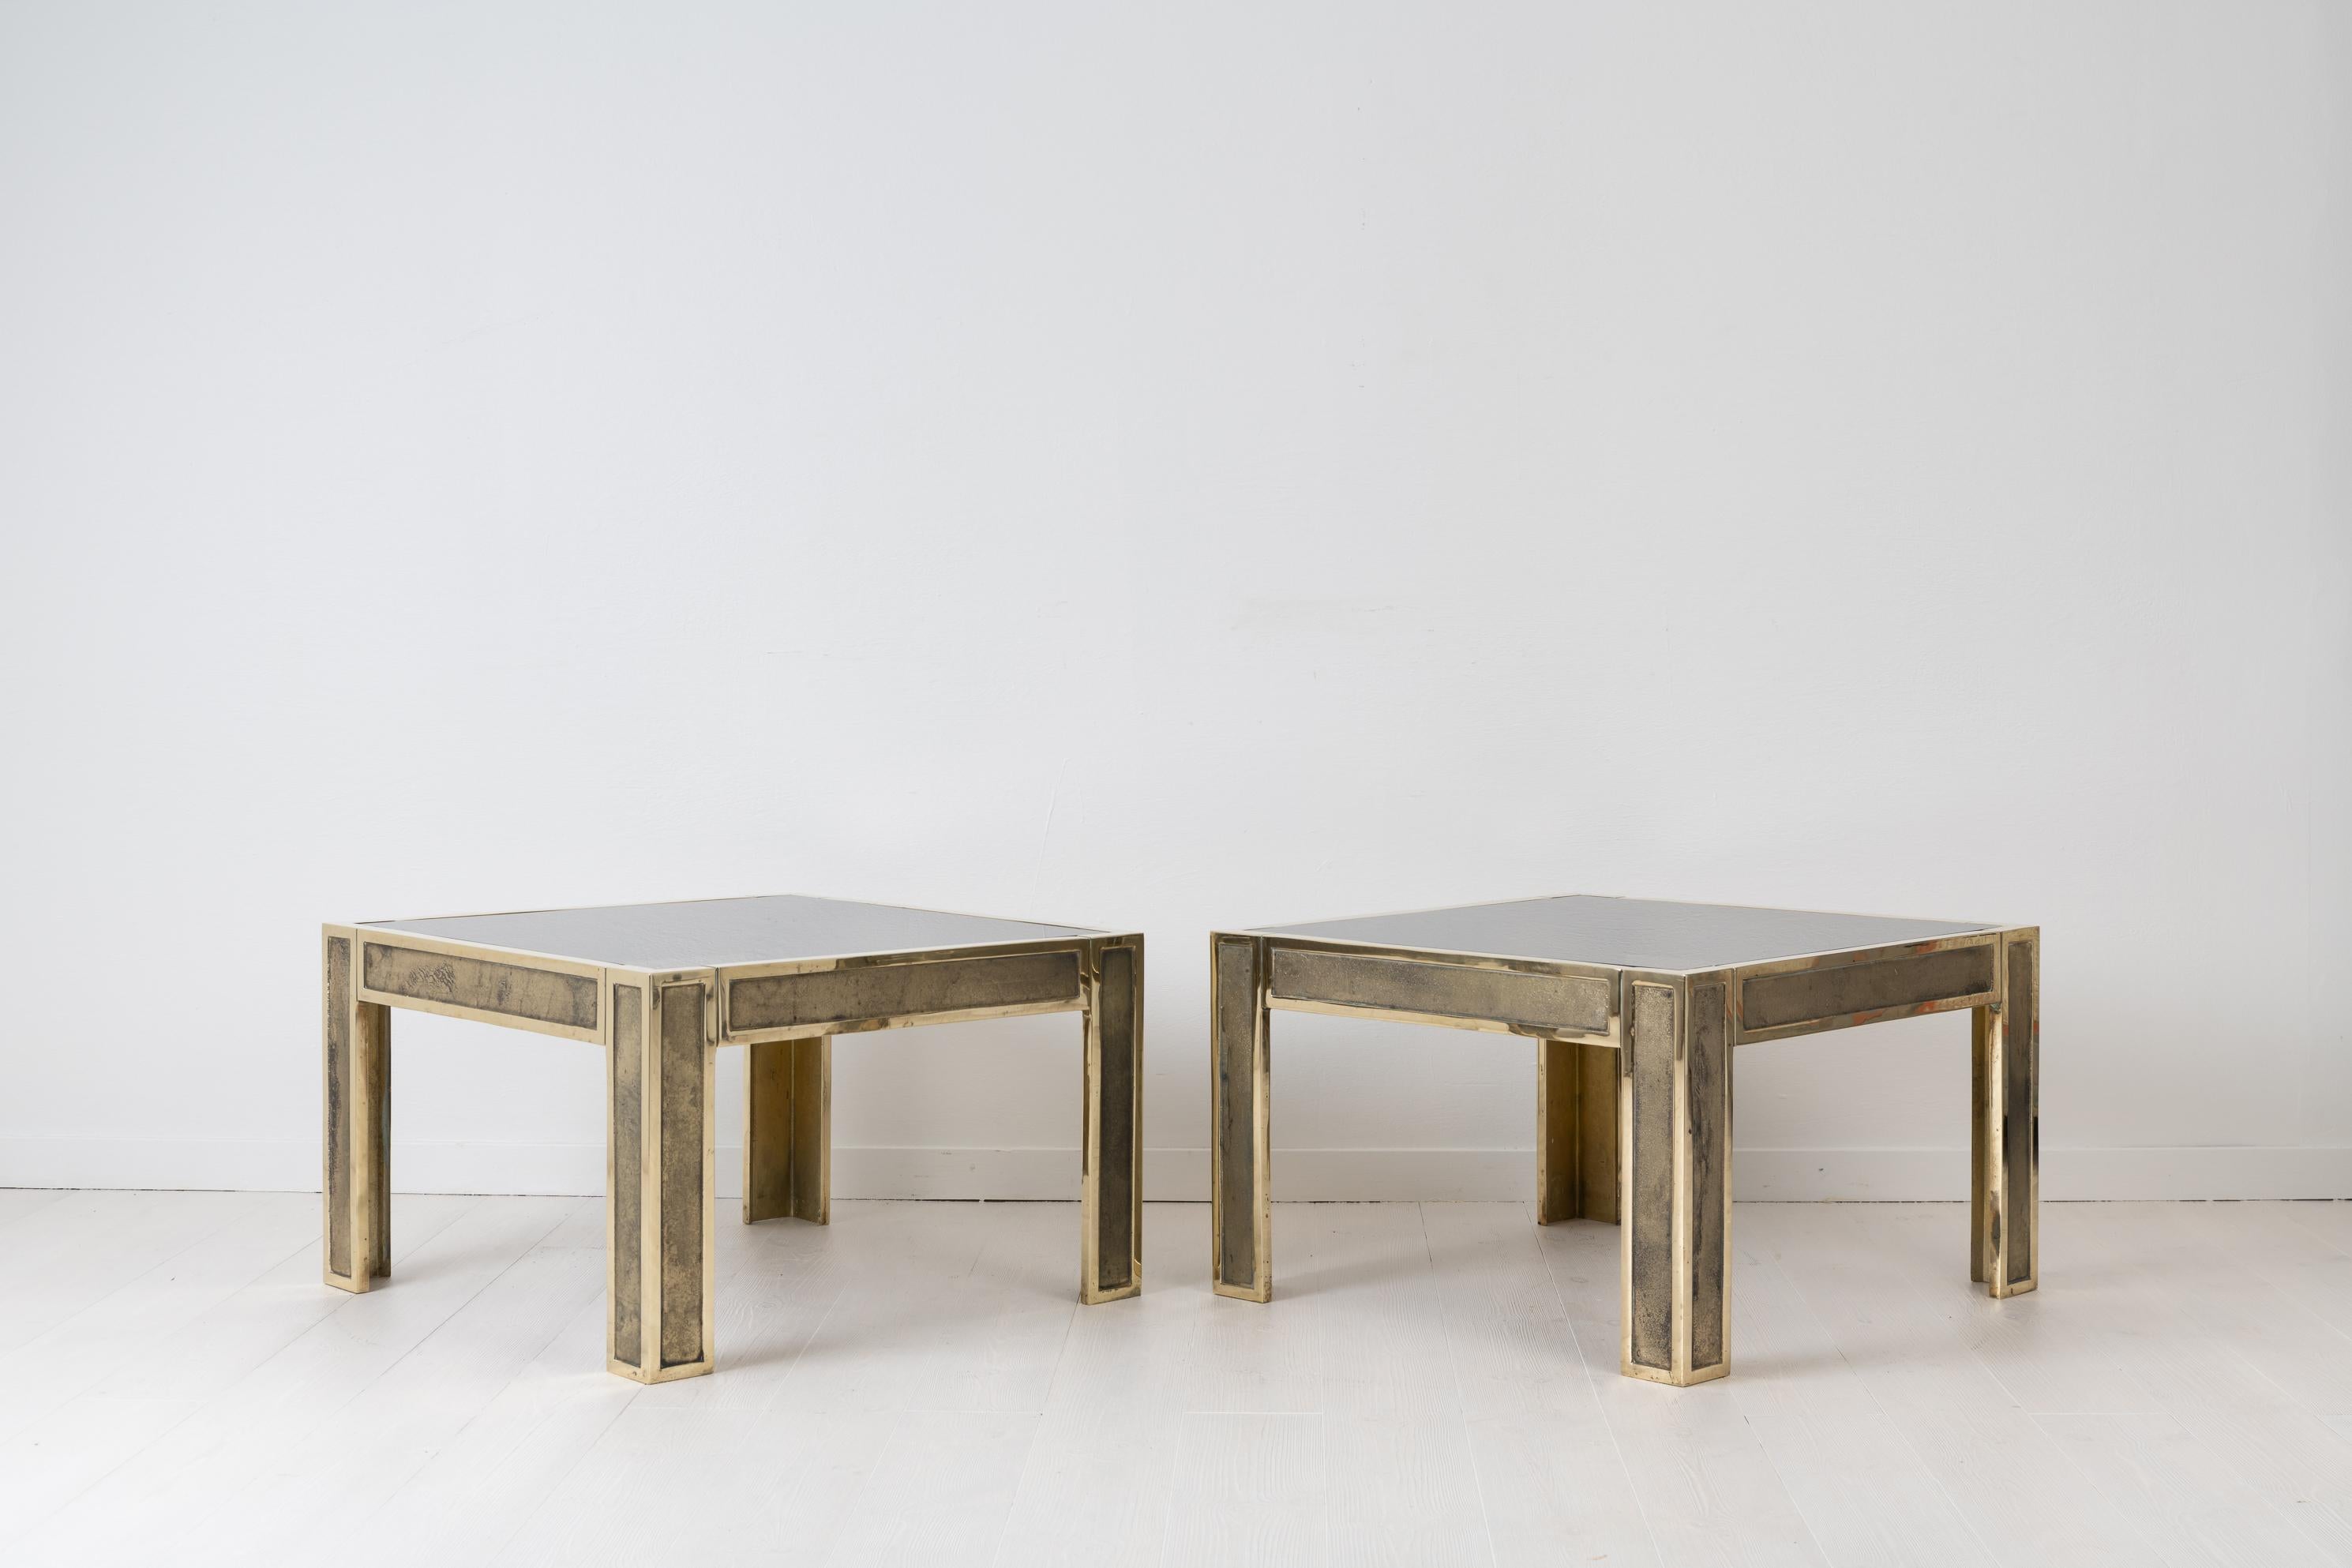 Pair of side tables from Norway. The tables are Scandinavian Modern and made circa 1960-1970. Shaped like squares with a frame in solid brass, the frame alone weighs 27 kg for each table. The table tops are smoked coloured glass. Both tables are in